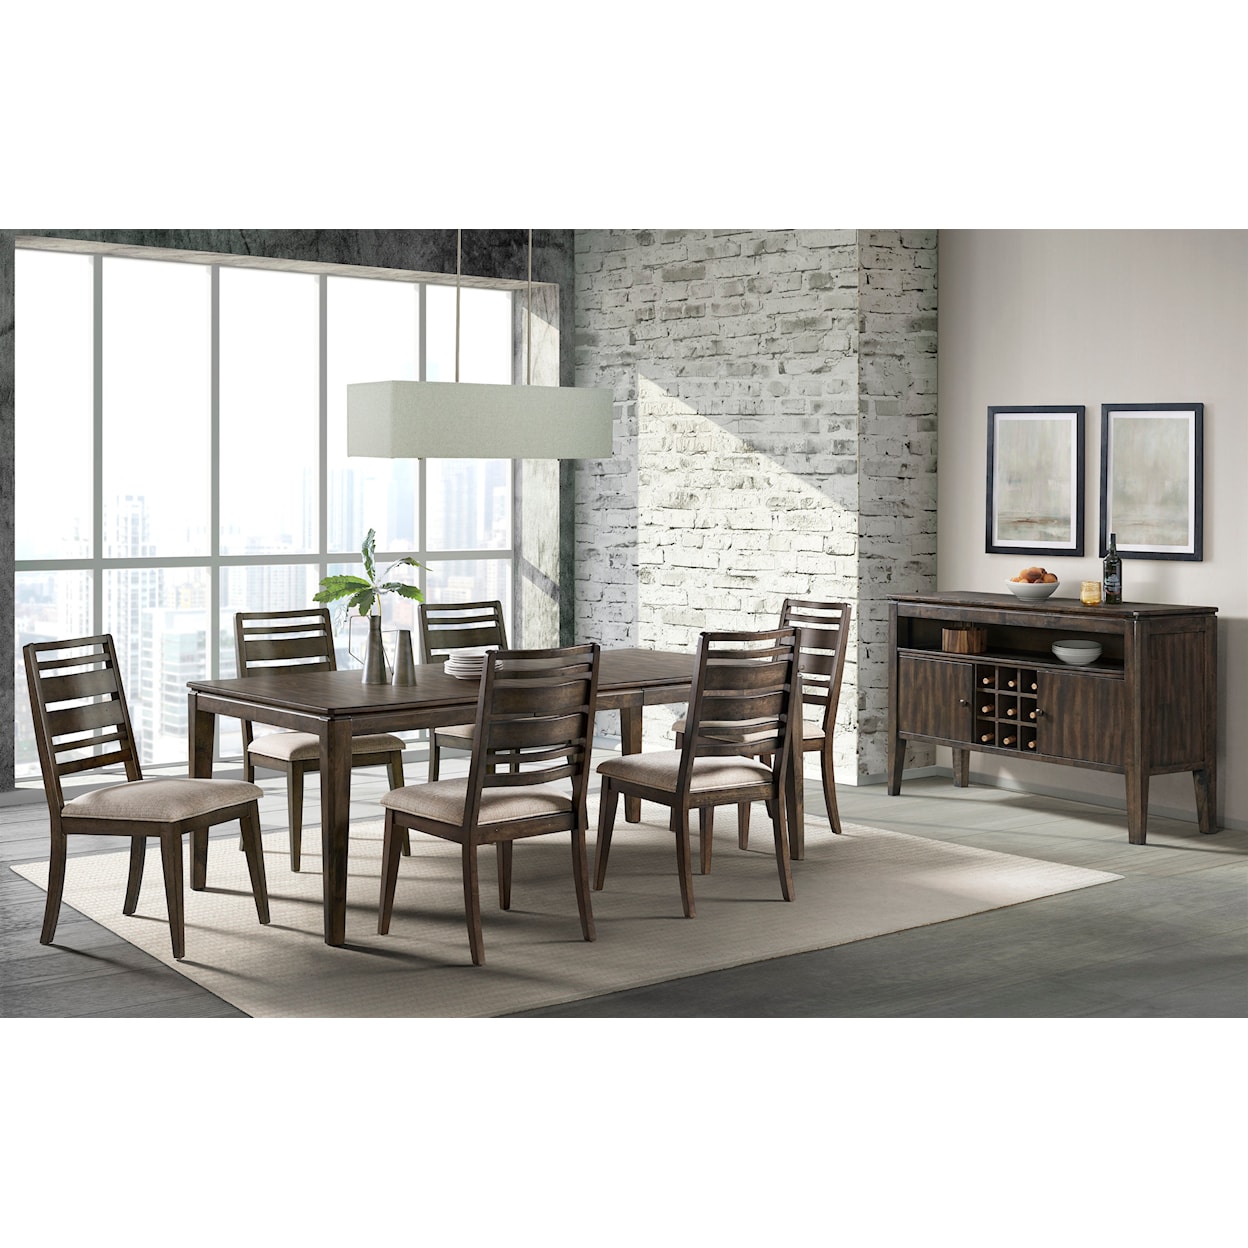 Belfort Select Tangier Expandable Dining Table